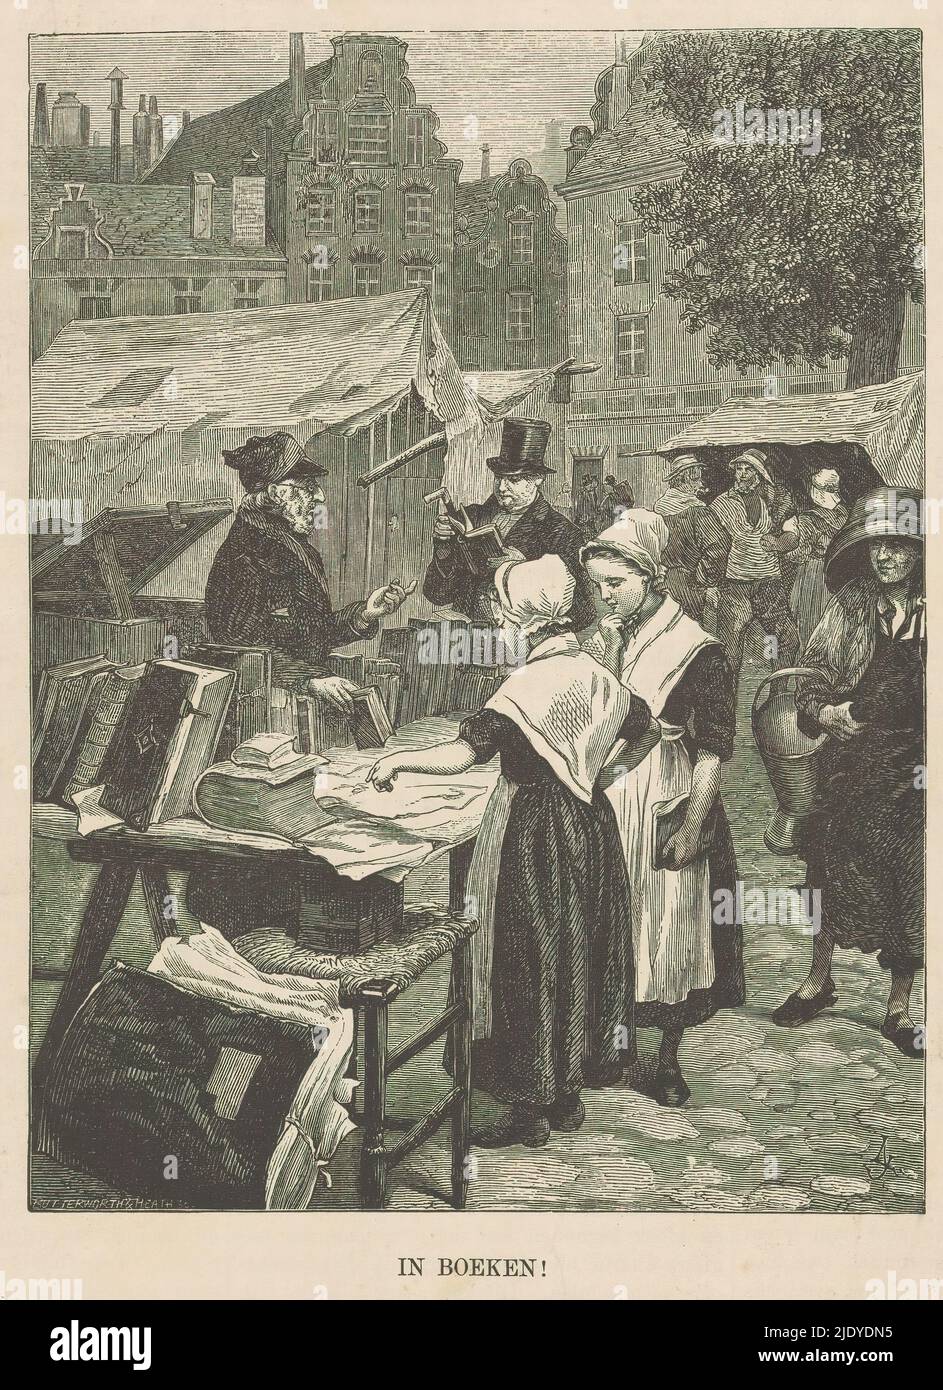 Bookseller at a market in Amsterdam, In Books! (title on object), Two orphaned girls and a man in a top hat view the offerings of a bookseller. Probably the Botermarkt in Amsterdam., print maker: Butterworth & Heath, (mentioned on object), after design by: Monogrammist LJ (laat 19e eeuw), after painting by: Paul Friedrich Meyerheim, c. 1887, paper, letterpress printing, height 208 mm × width 148 mm Stock Photo